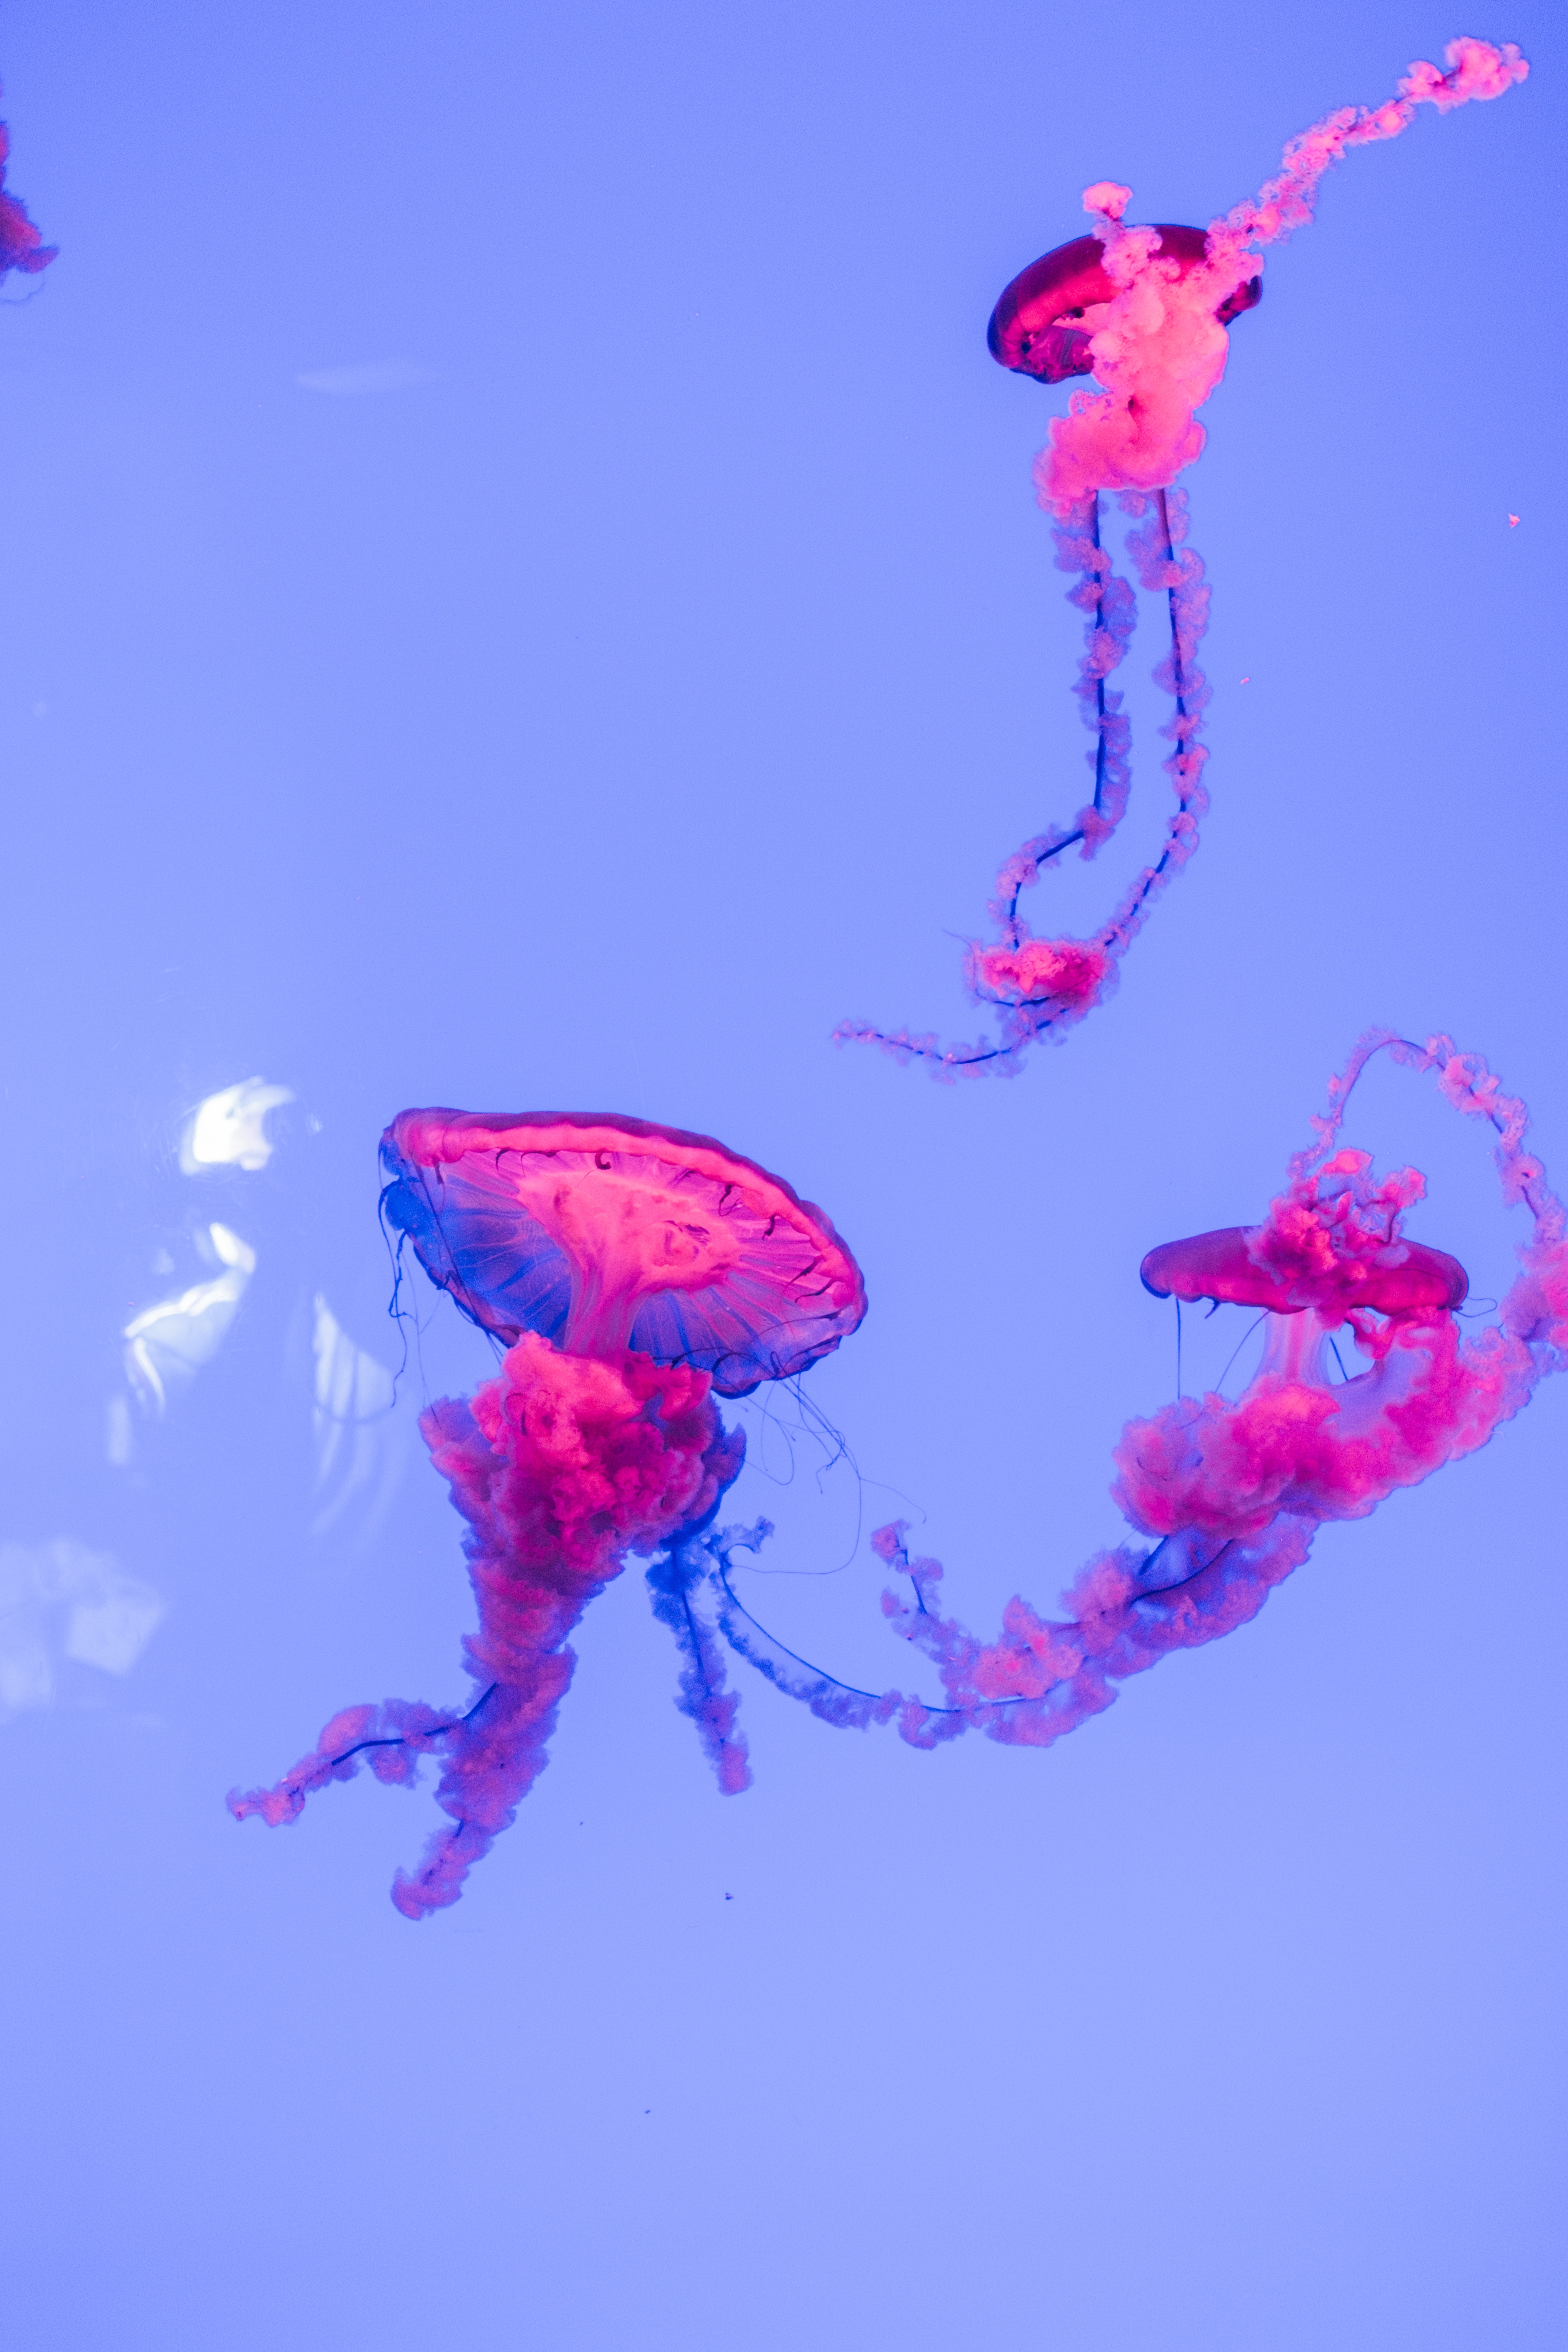 pink jellyfish swirling in blue water